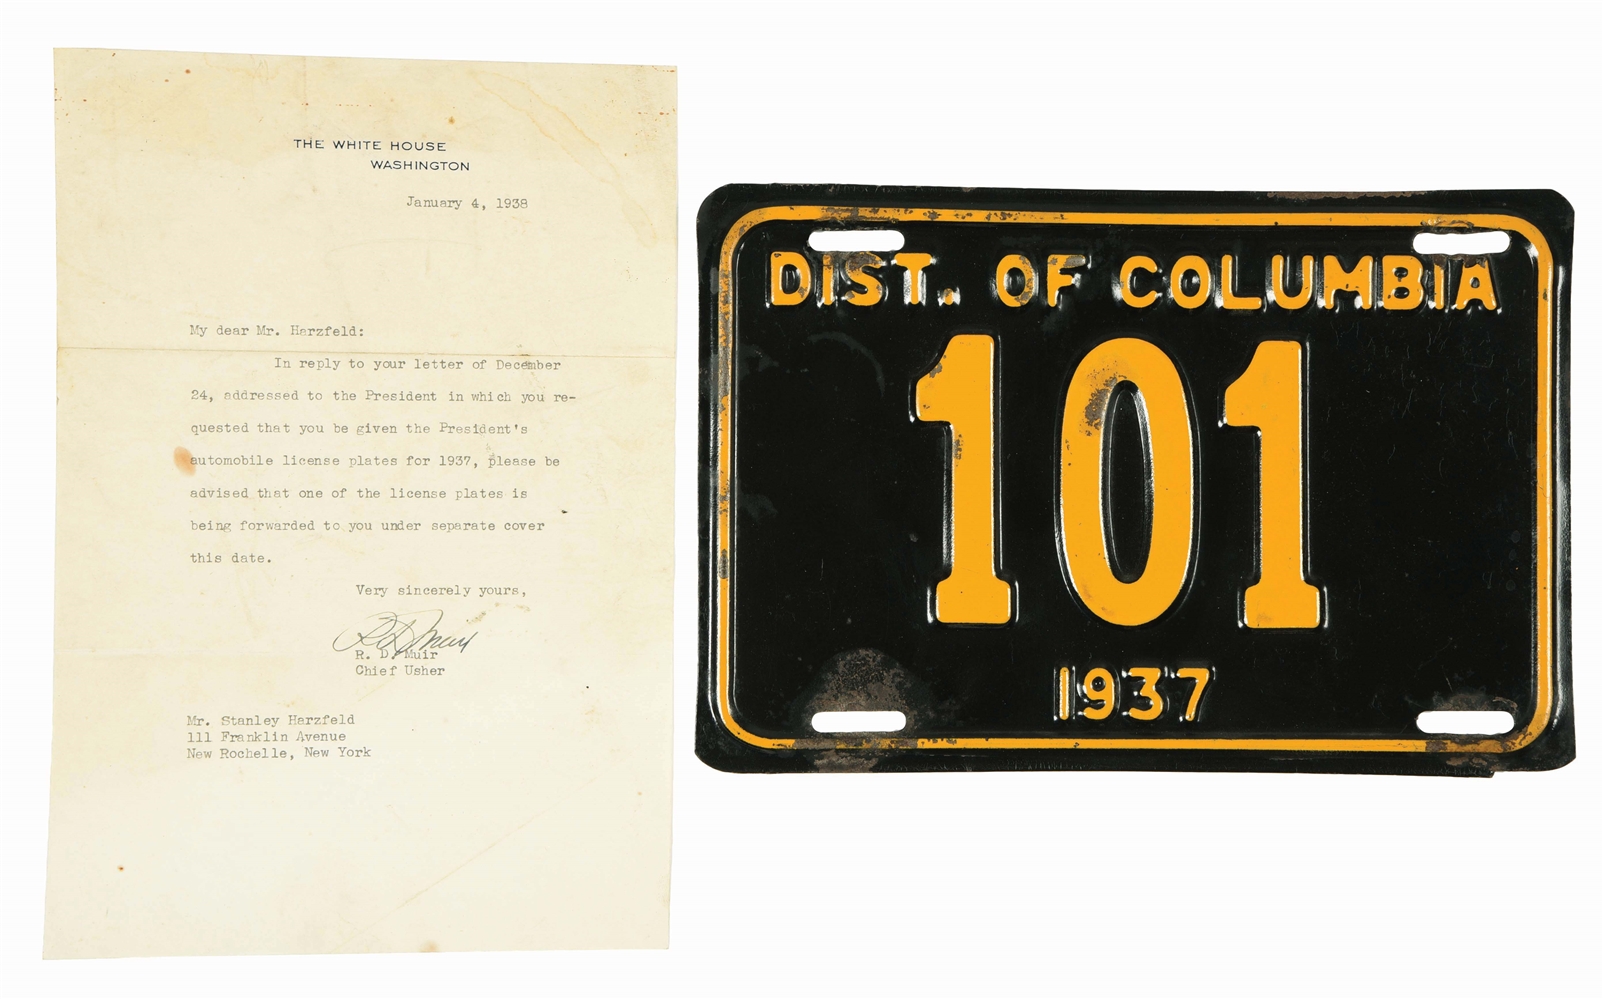 1937 DISTRICT OF COLUMBIA PRESIDENTIAL LICENSE PLATE.